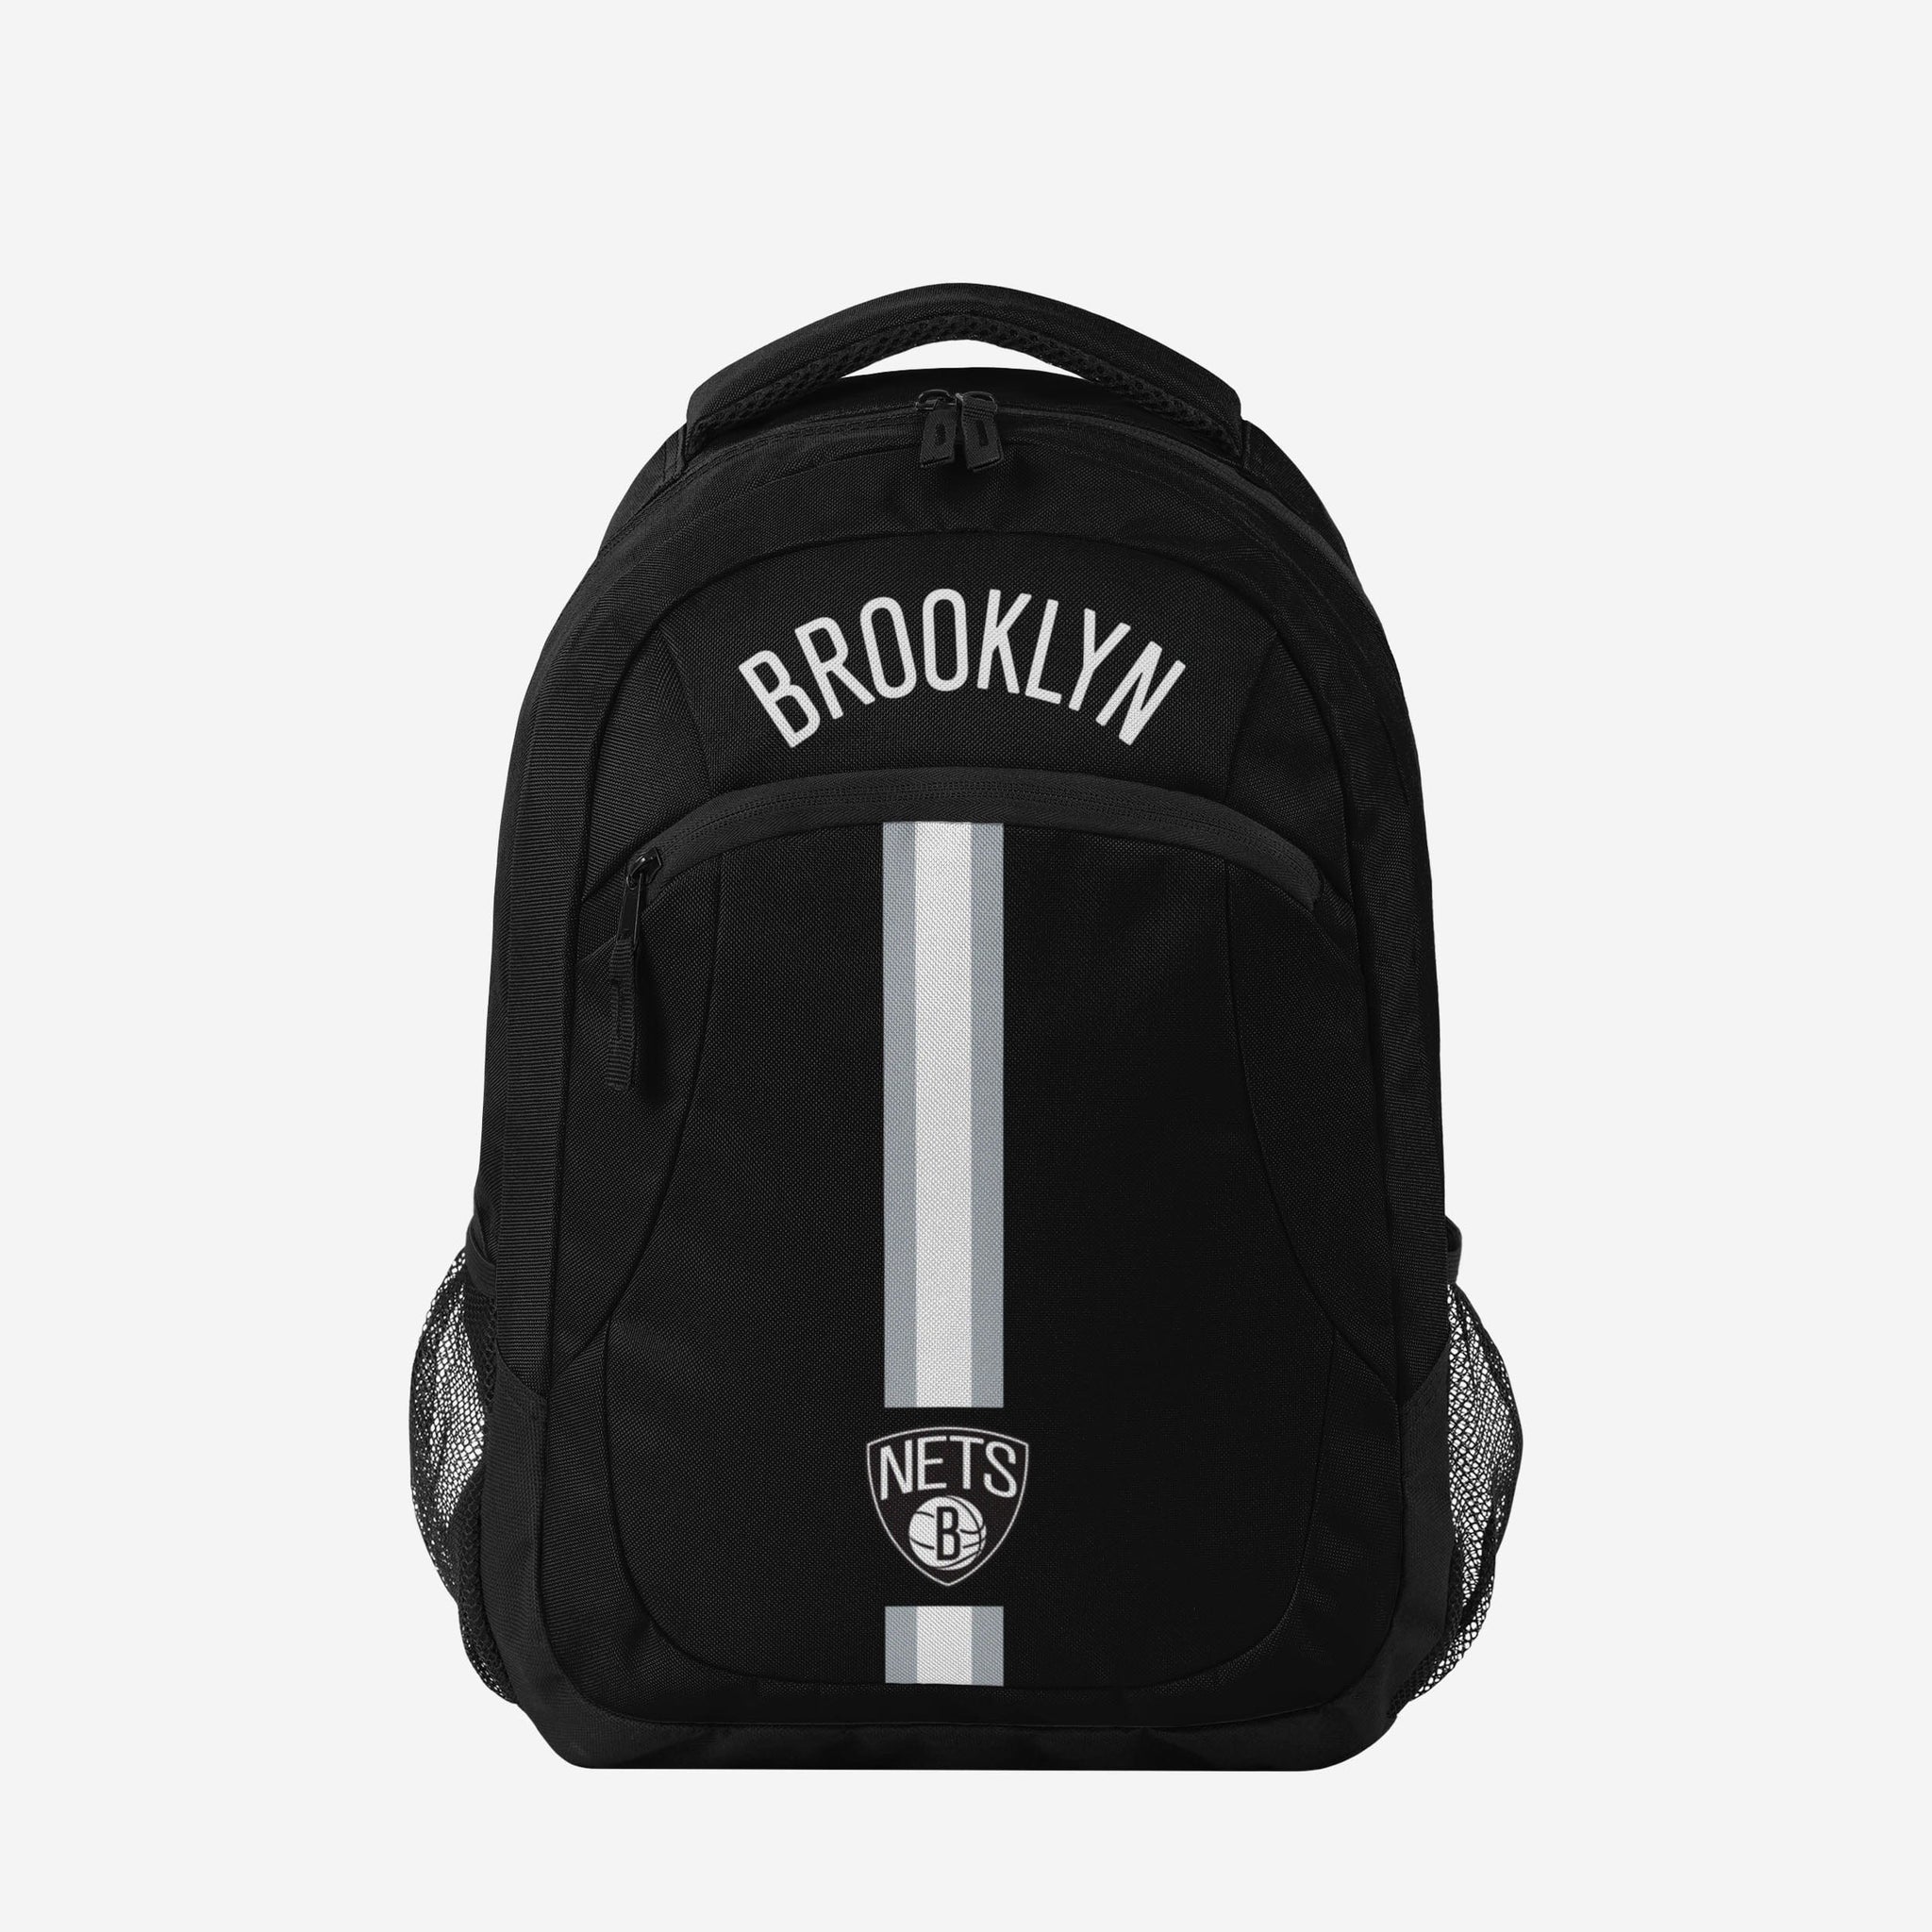  Milwaukee Backpack High capacity Custom Any Name and Any  Number Gifts for Kids Men Fans